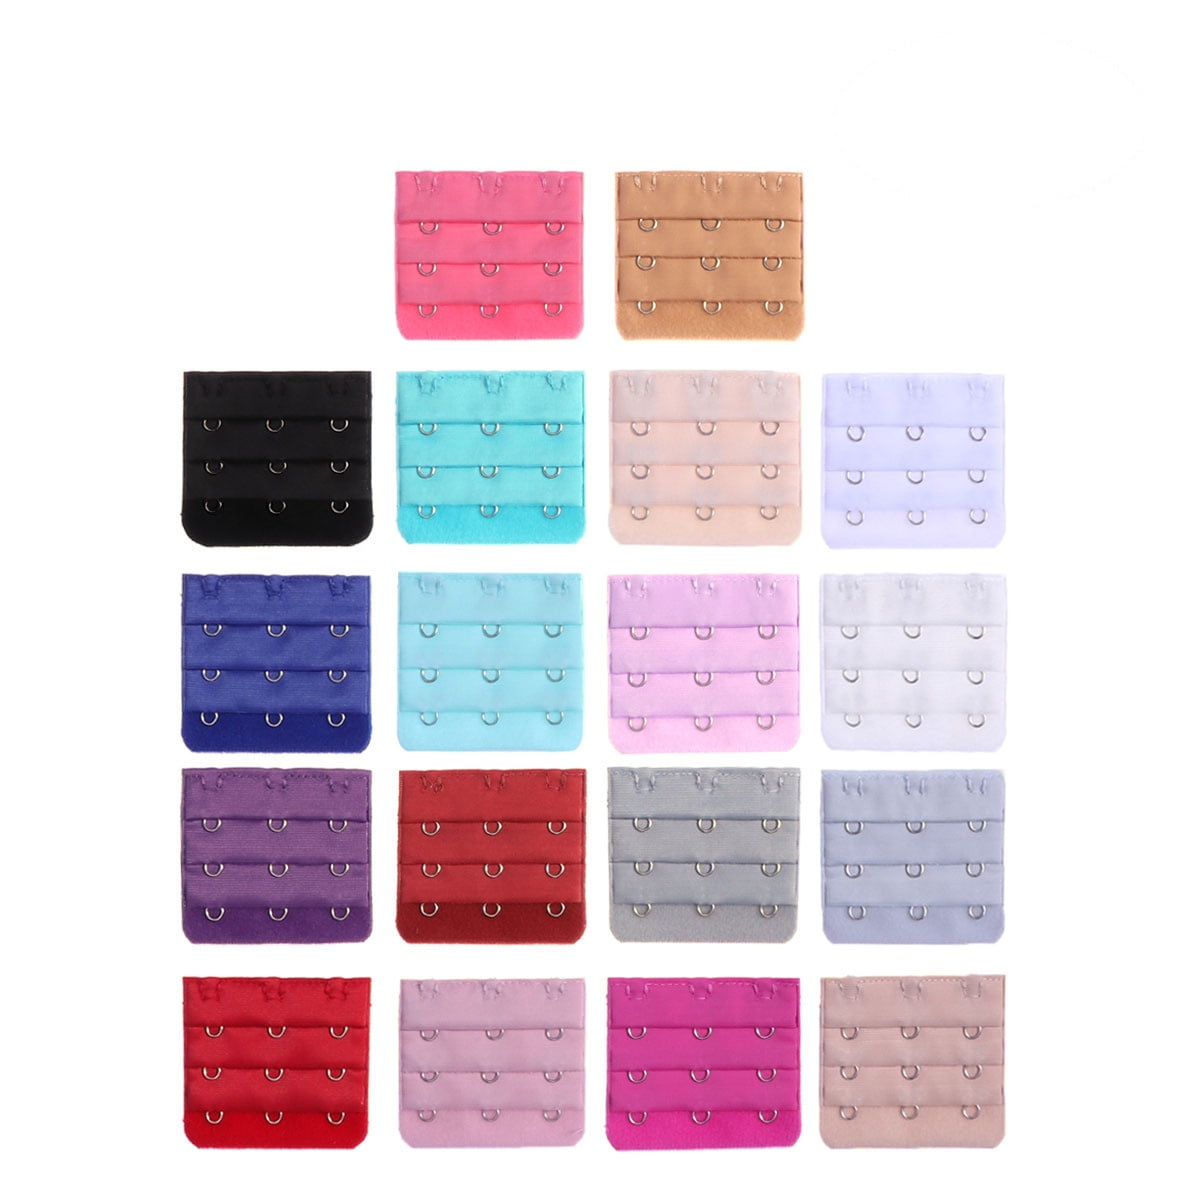 Pixnor 36pcs Women's Bra Extenders Brassiere Extension Hooks 2 Hooks and 3 Hooks (18 Colors), Size: One size, Red